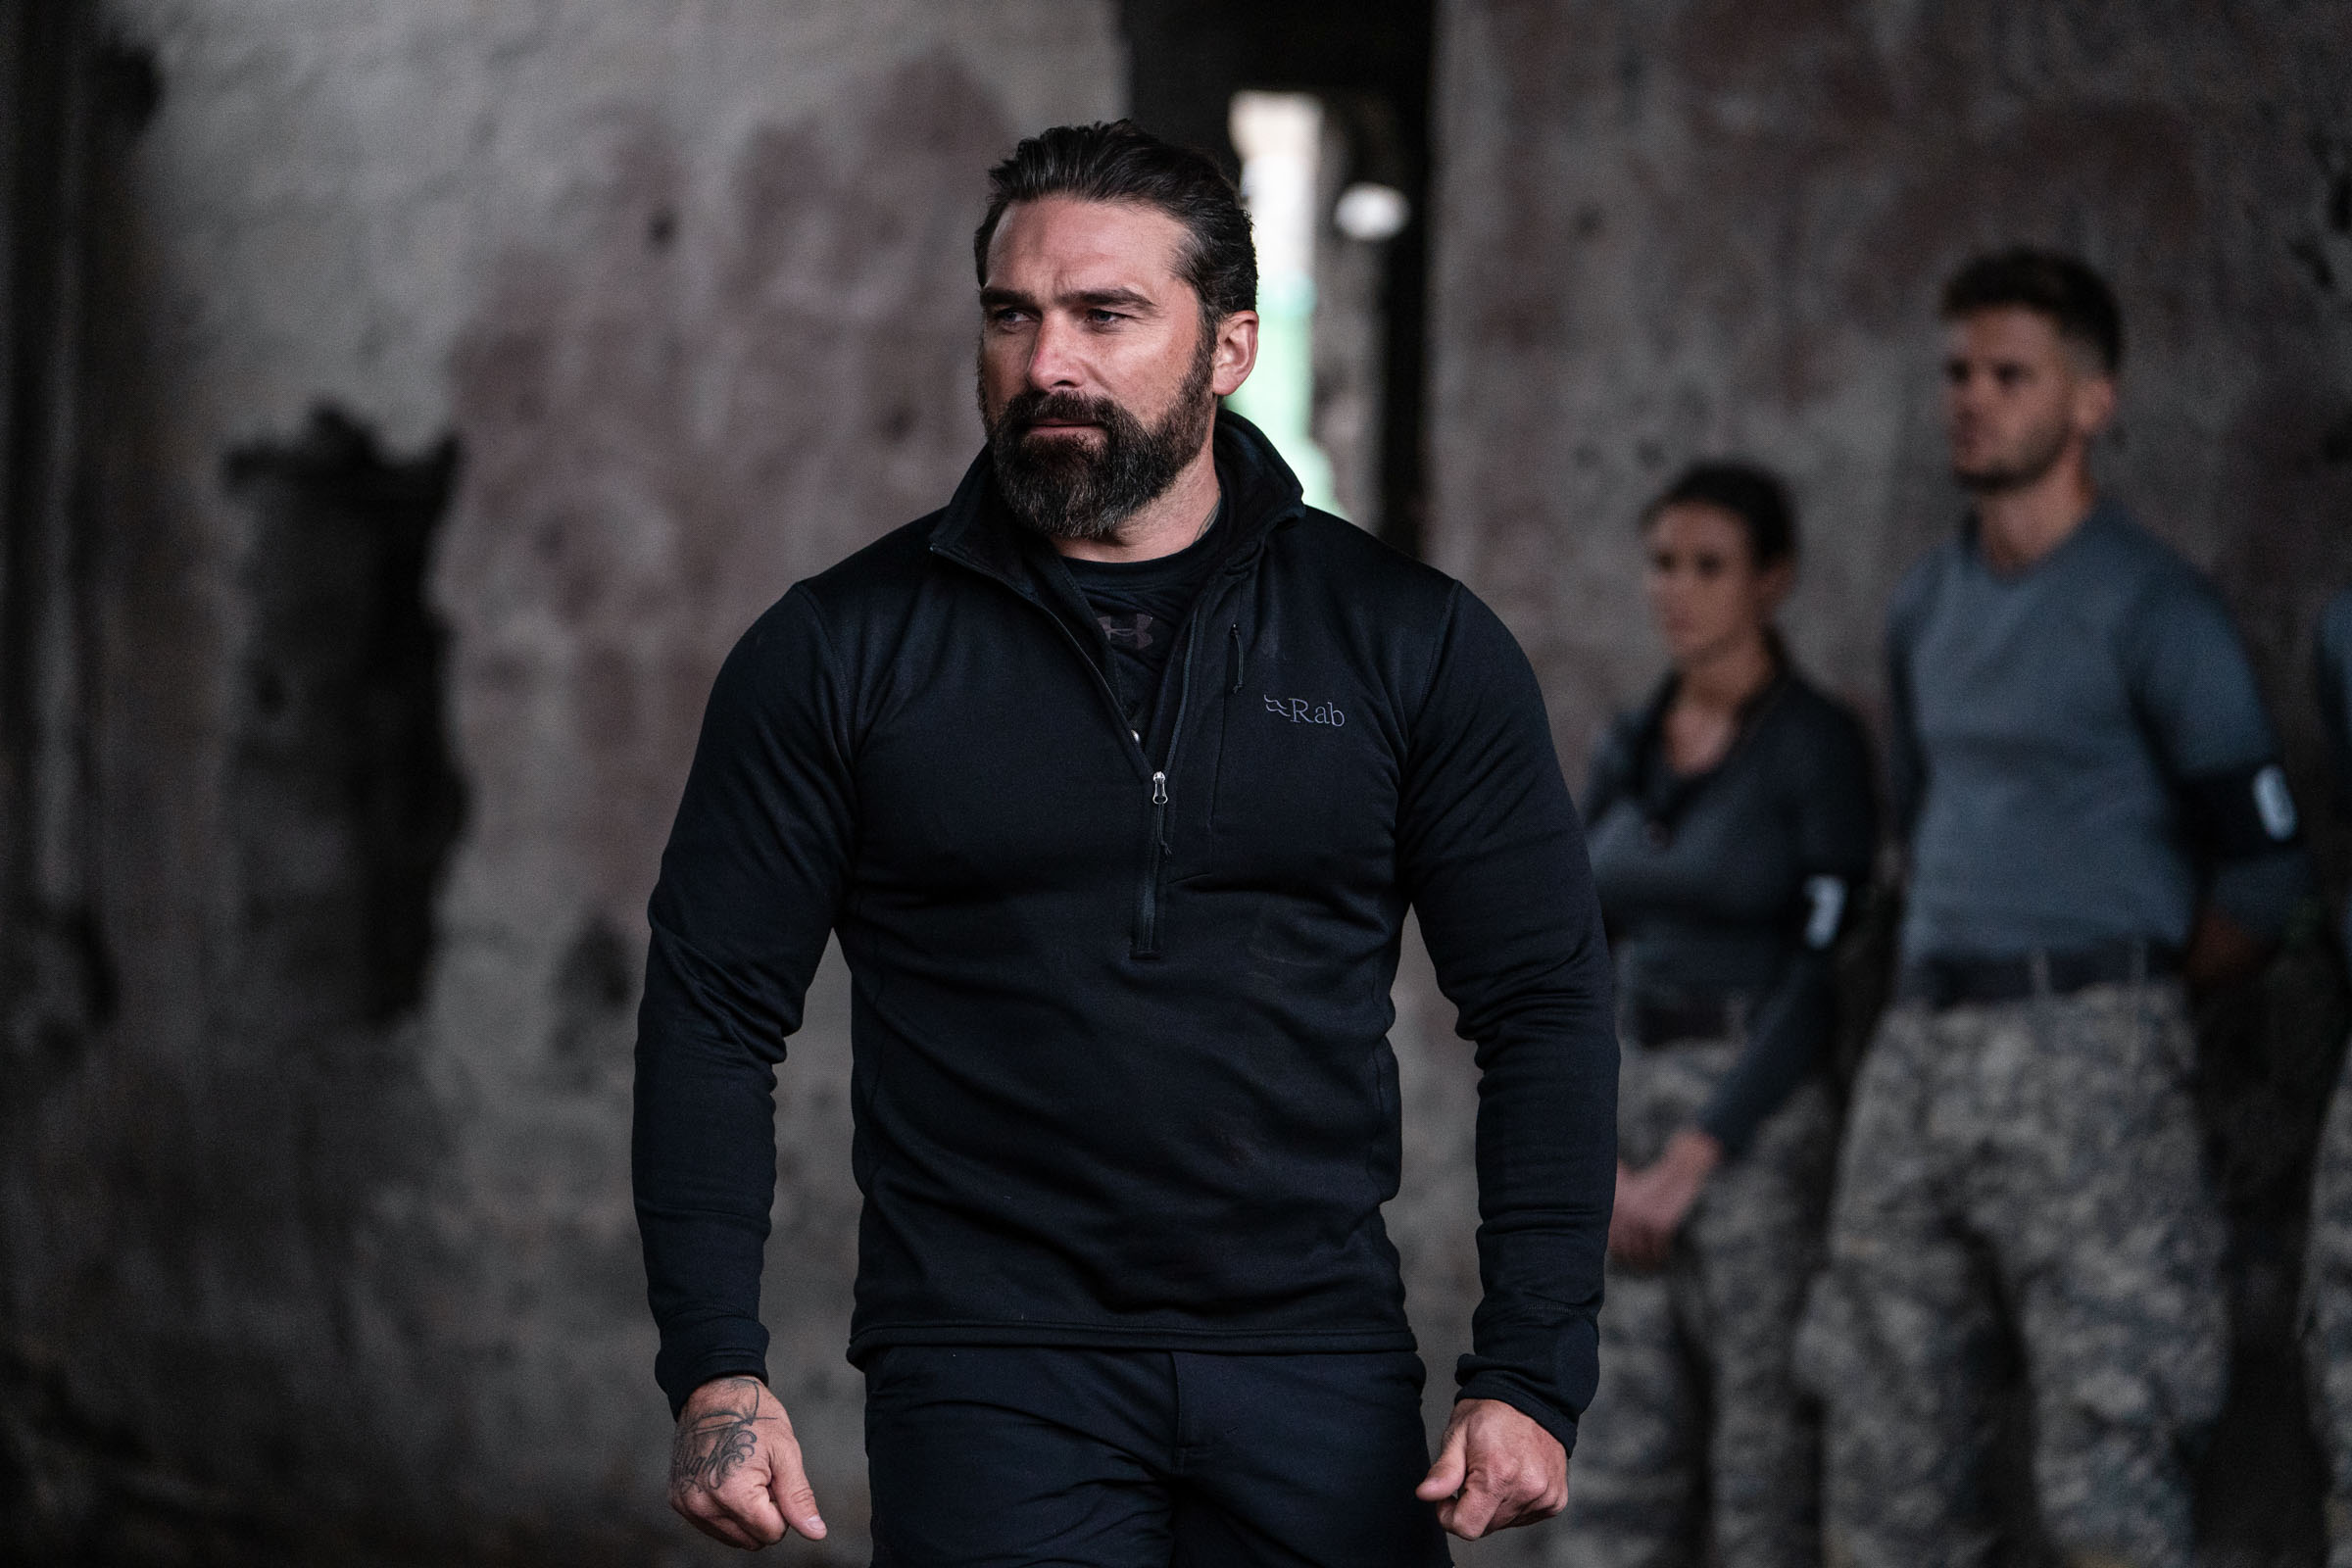  Chief Instructor Ant Middleton during the 2 vs 1 boxing  Episode 1 - Courage  Minnow Films / Channel 4 